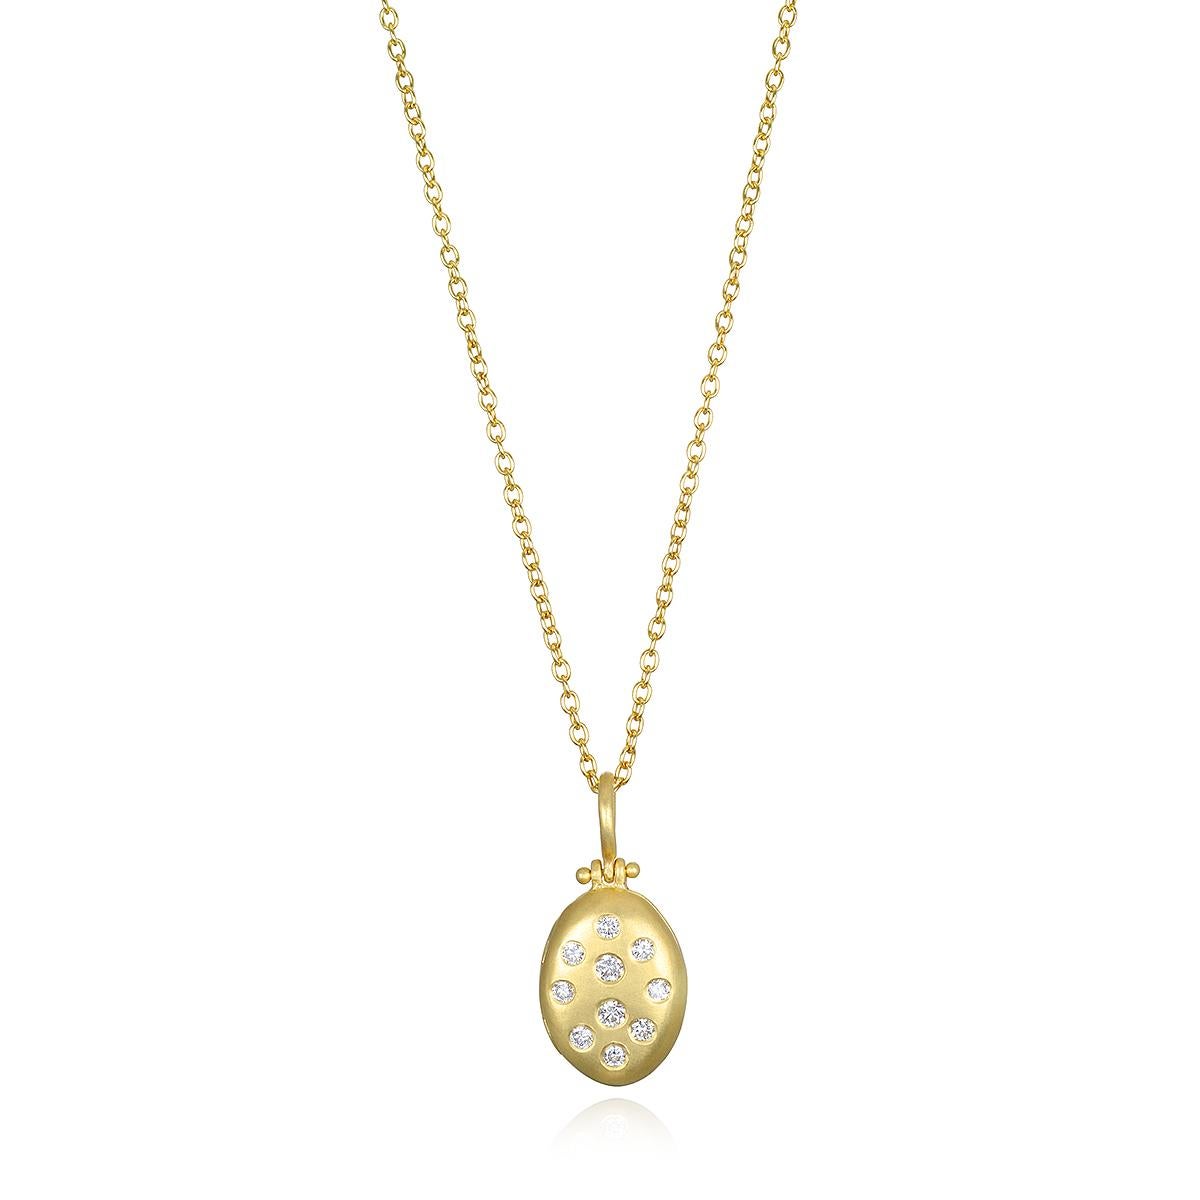 Faye Kim's 18 Karat Gold and Diamond Small Oval Locket combines substance with style, and offers just the right amount of sparkle. Finely handcrafted and matte-finished, this locket can be personalized with an engraving, and layered with other